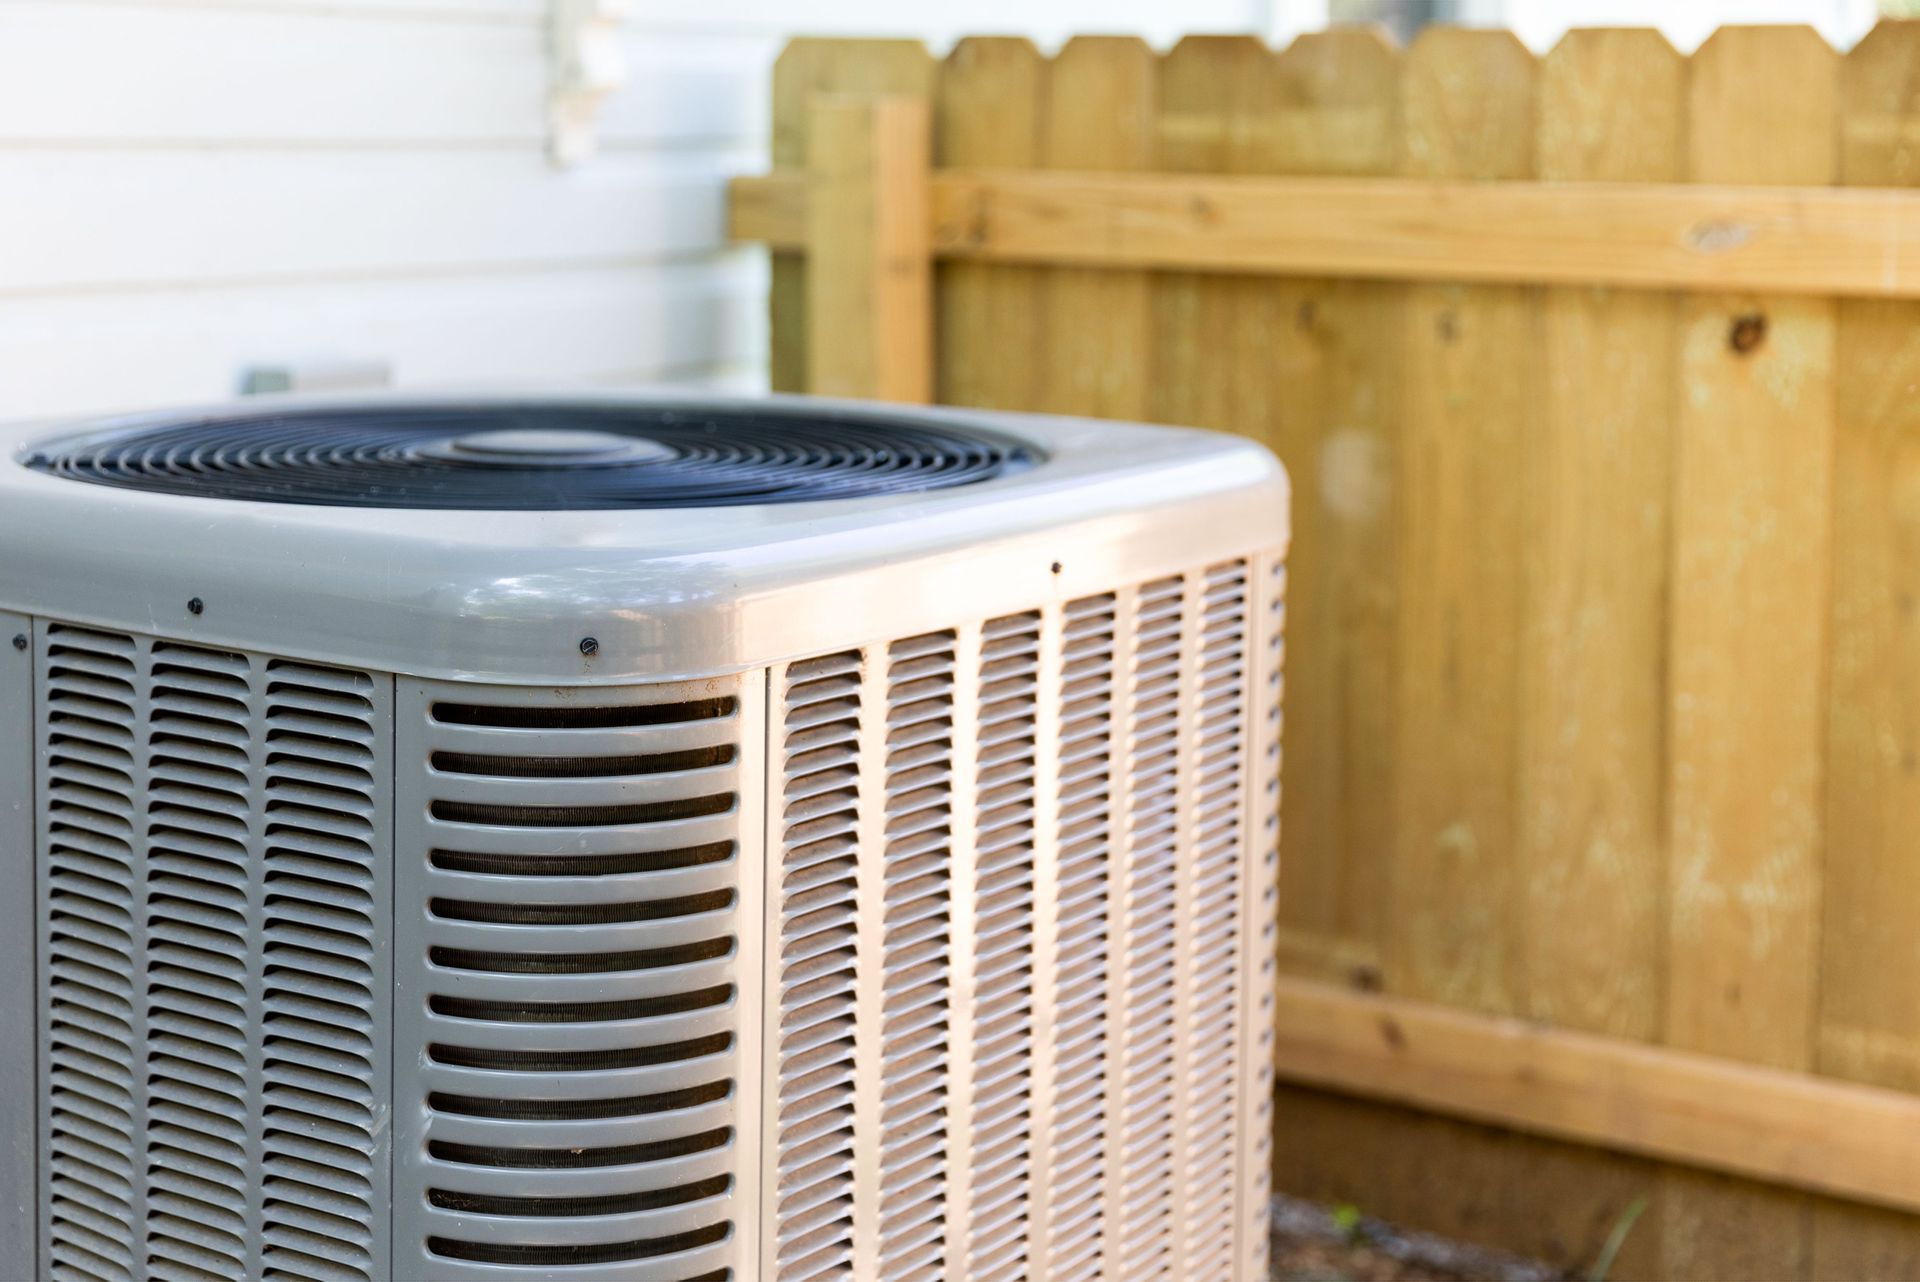 An air conditioner is sitting in front of a wooden fence.